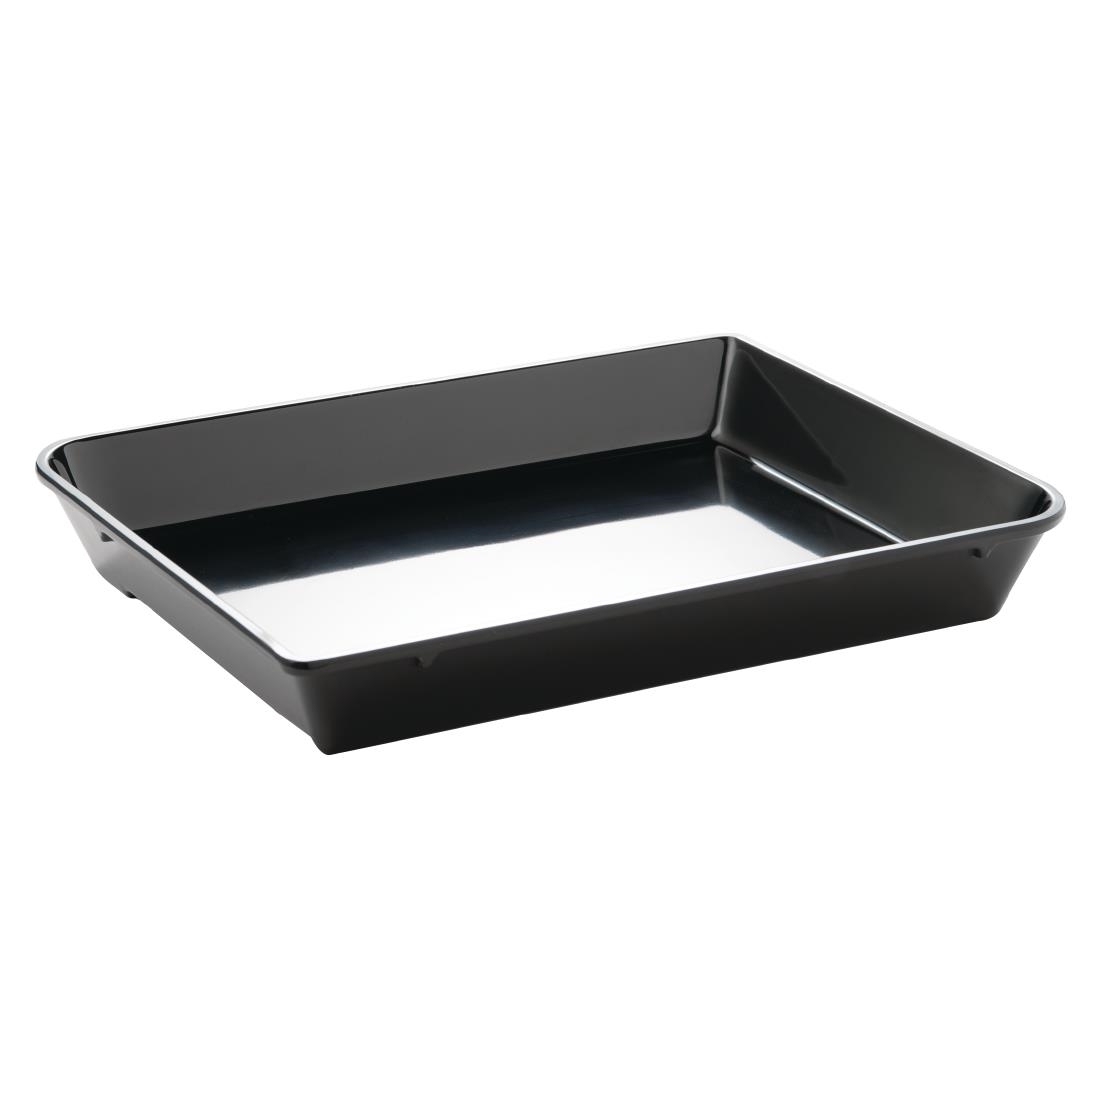 APS Black Counter System 290 x 220 x 40mm